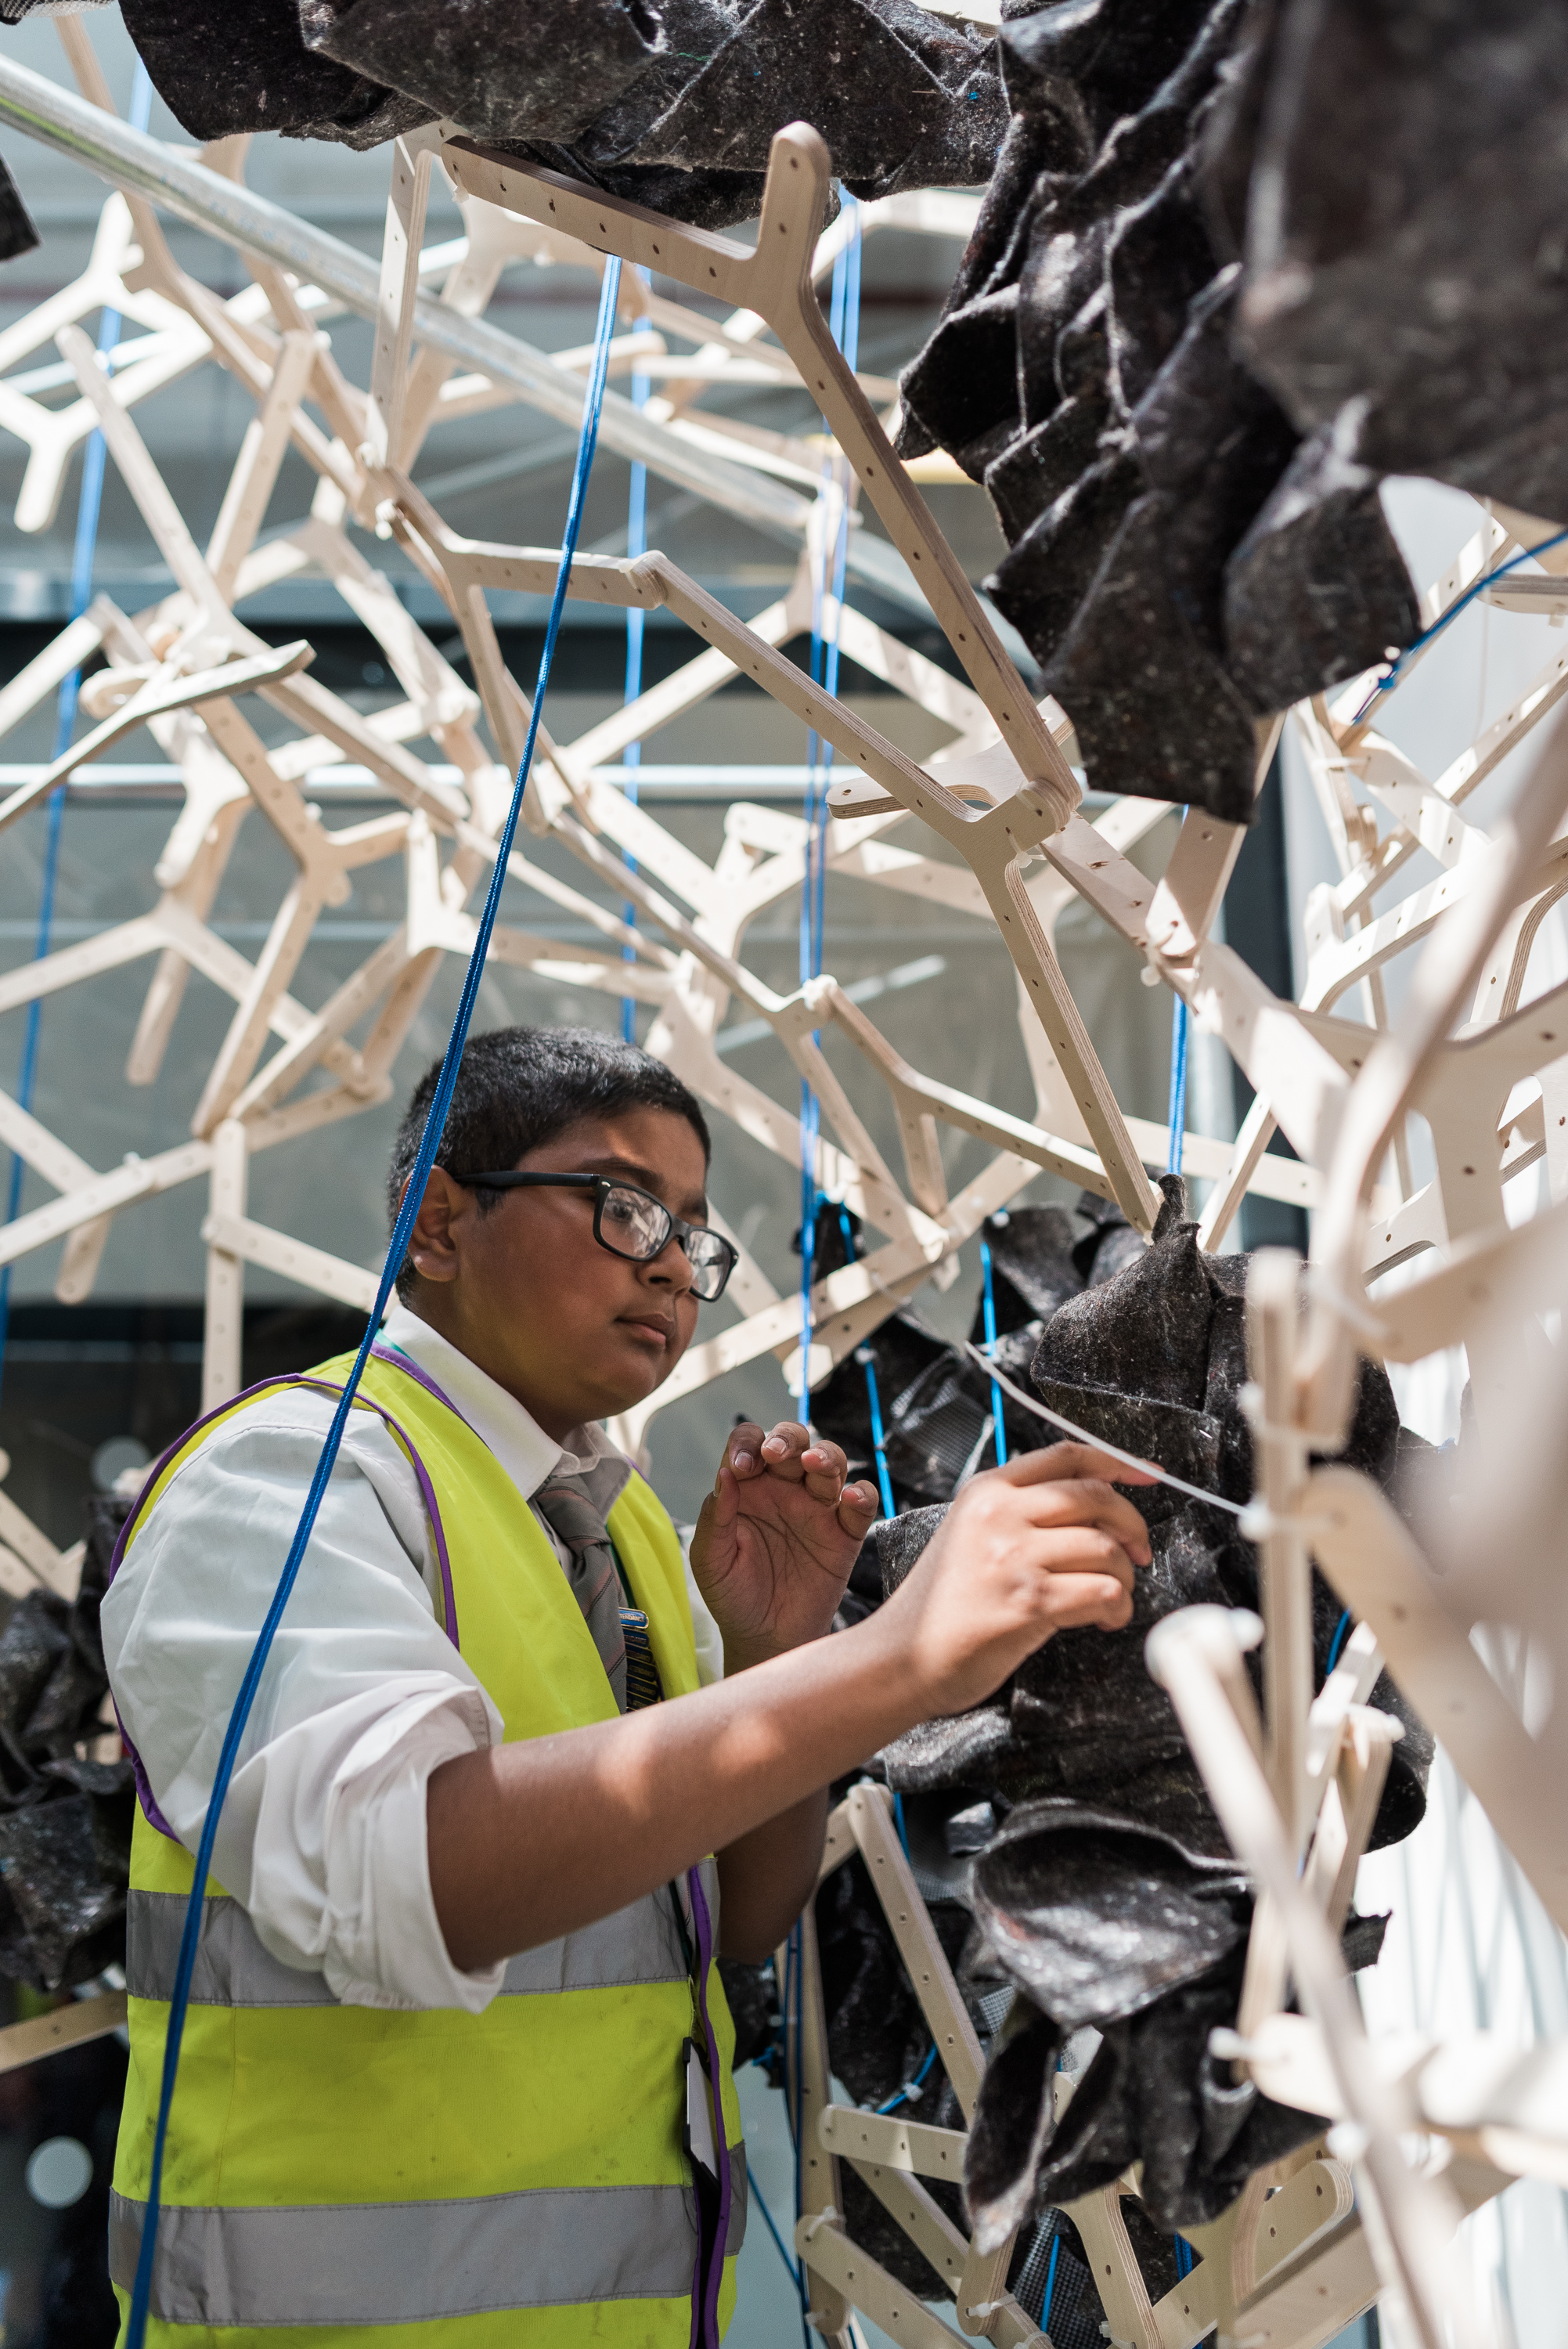 Roofing geotextile inspires students’ library design